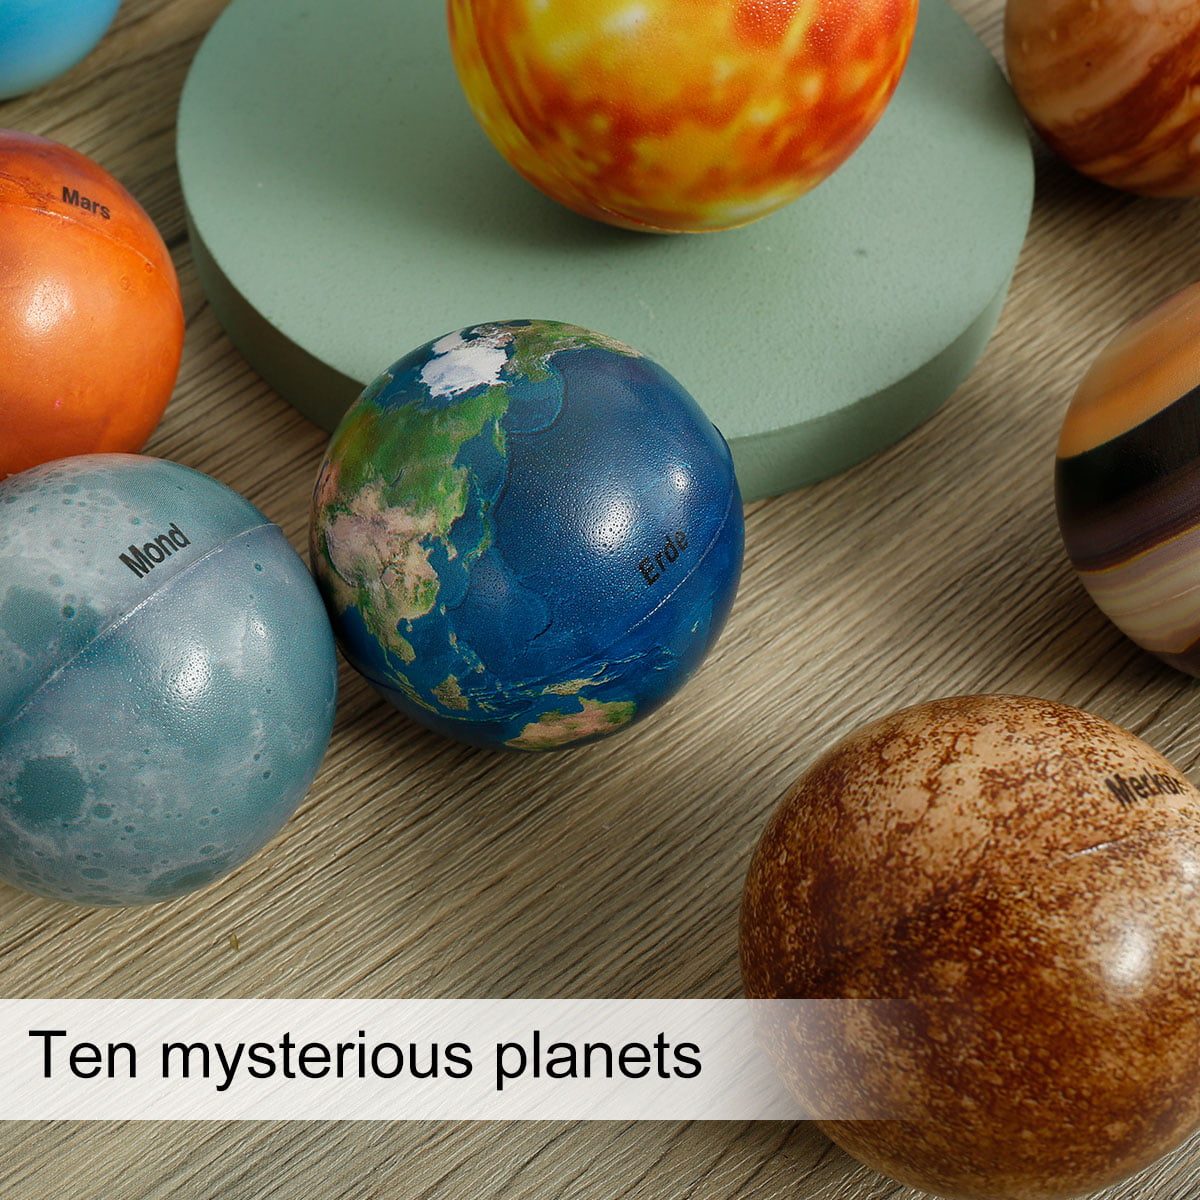 10pcs Solar System Planet Stress Balls,Stress Relief Planets and Space Ball Educational Toys,Anti Stress Solar Educational Balls for Adults and Kids